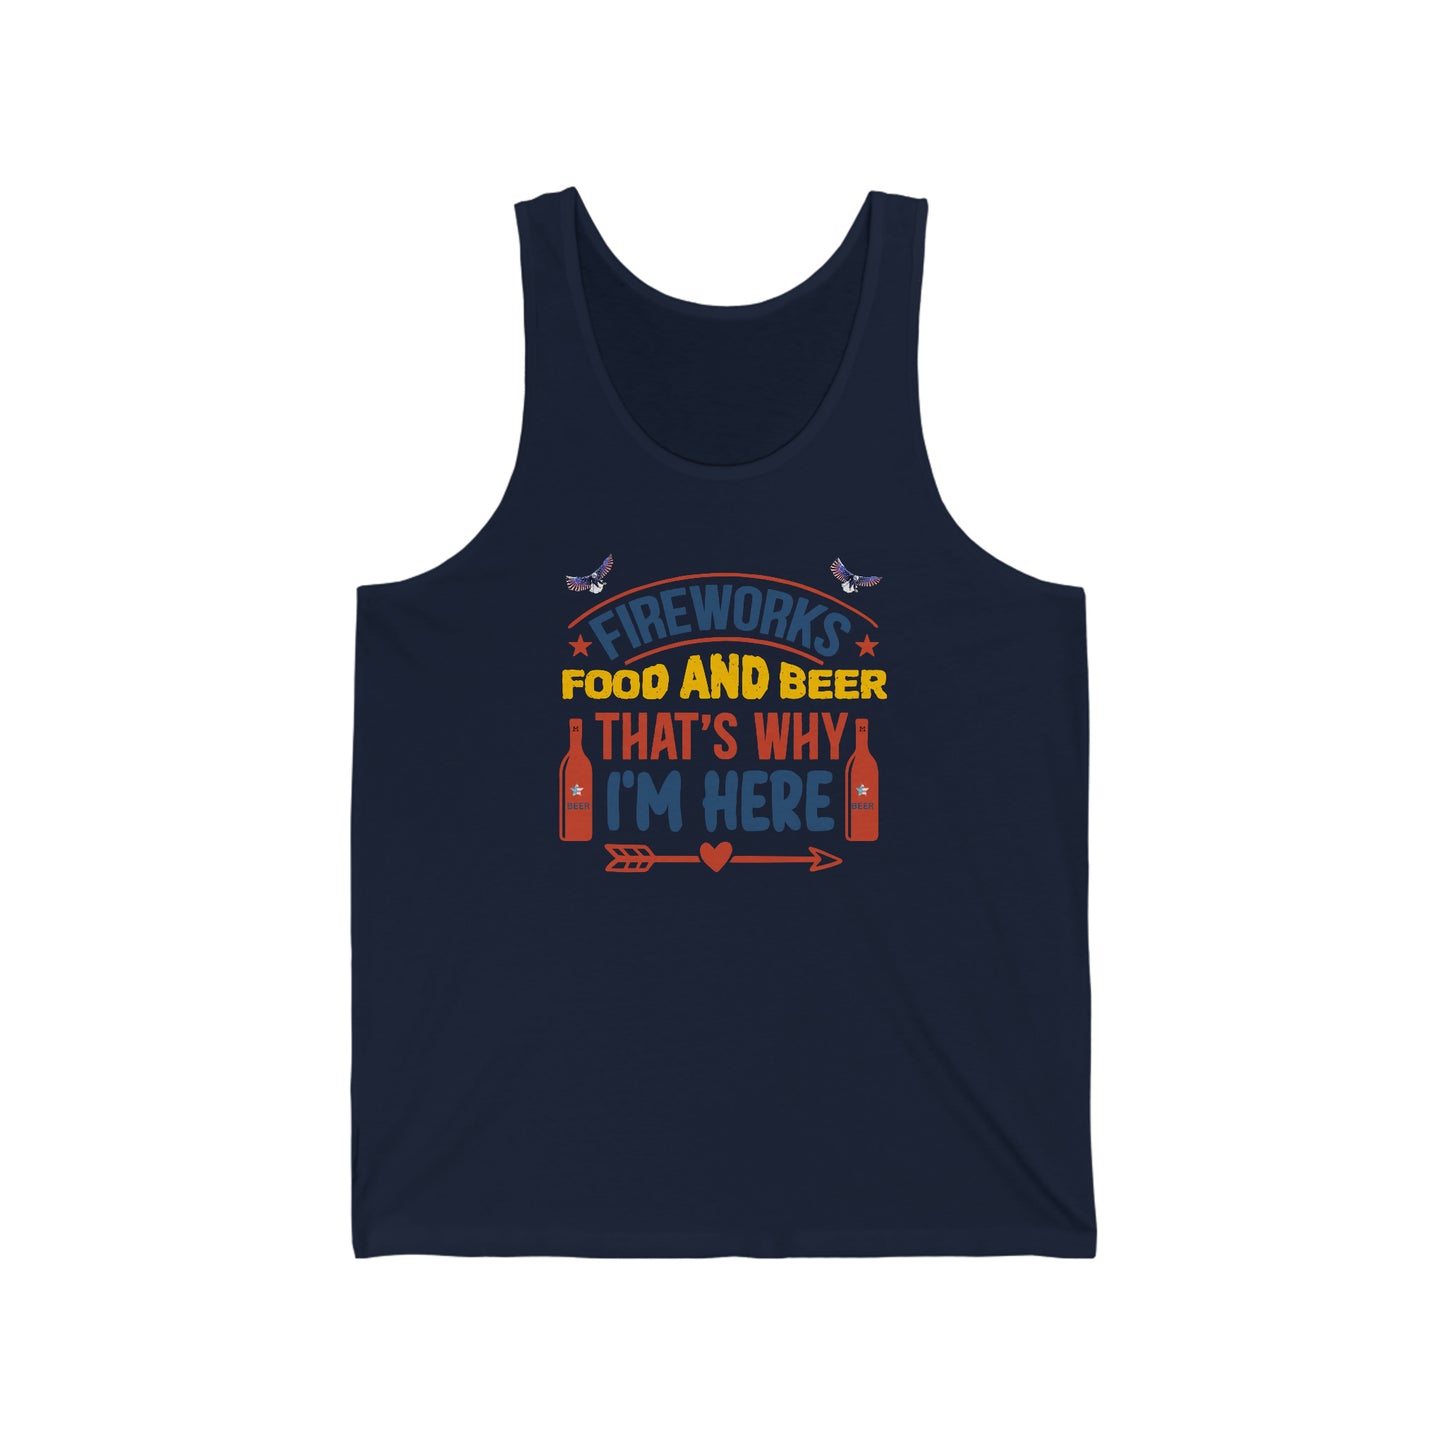 Summer USA Patriotic Holiday Fireworks Food Beer Good Times Unisex Jersey Tank in 5 colors